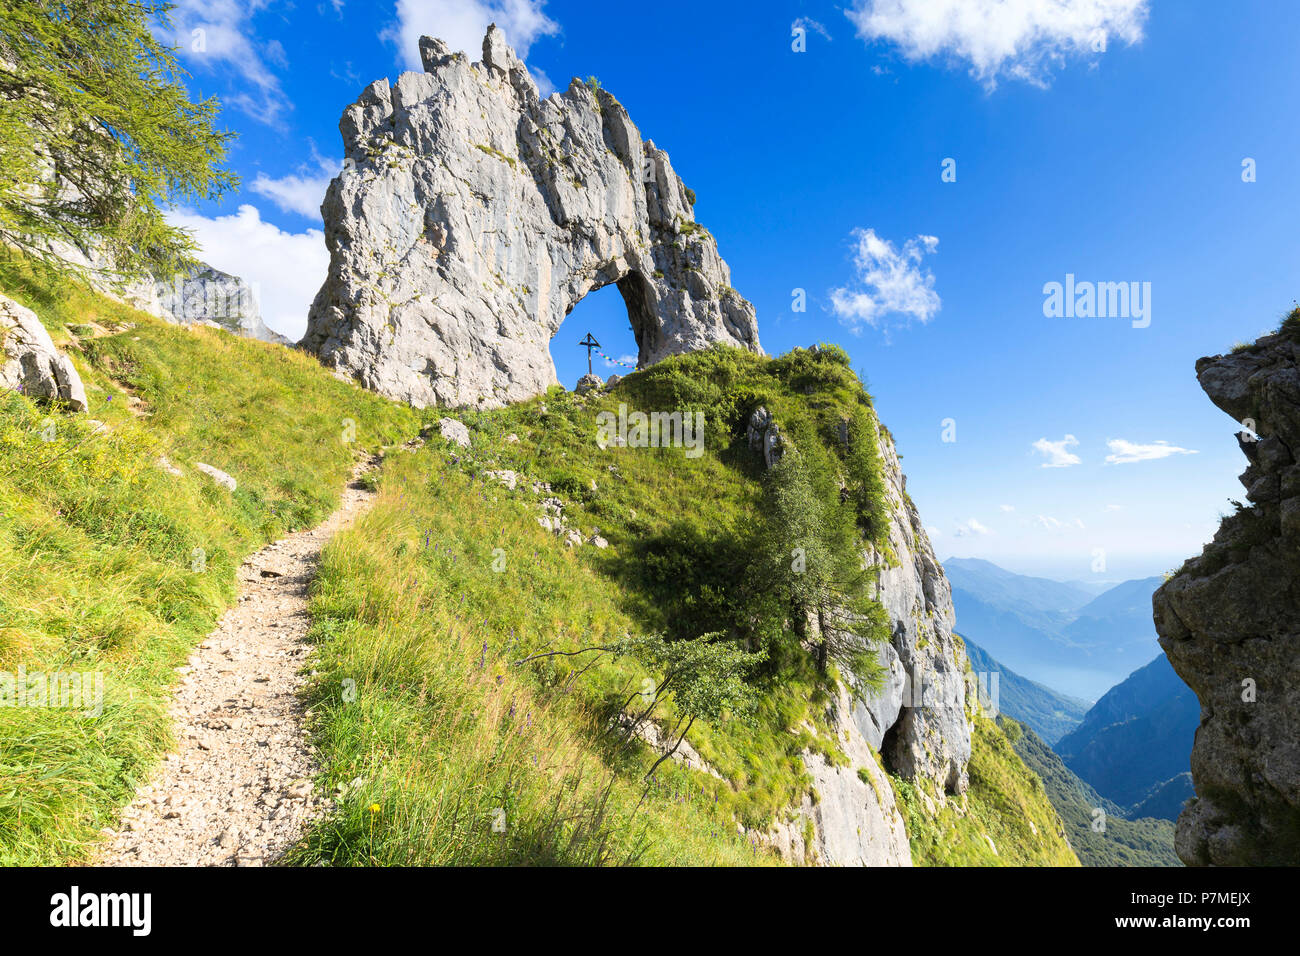 A path leads to Porta di Prada, a rock natural arch in the Grigna group,  Grigna Settentrionale / Grignone, Northern Grigna Regional Park, Lombardy,  Italy, Europe Stock Photo - Alamy